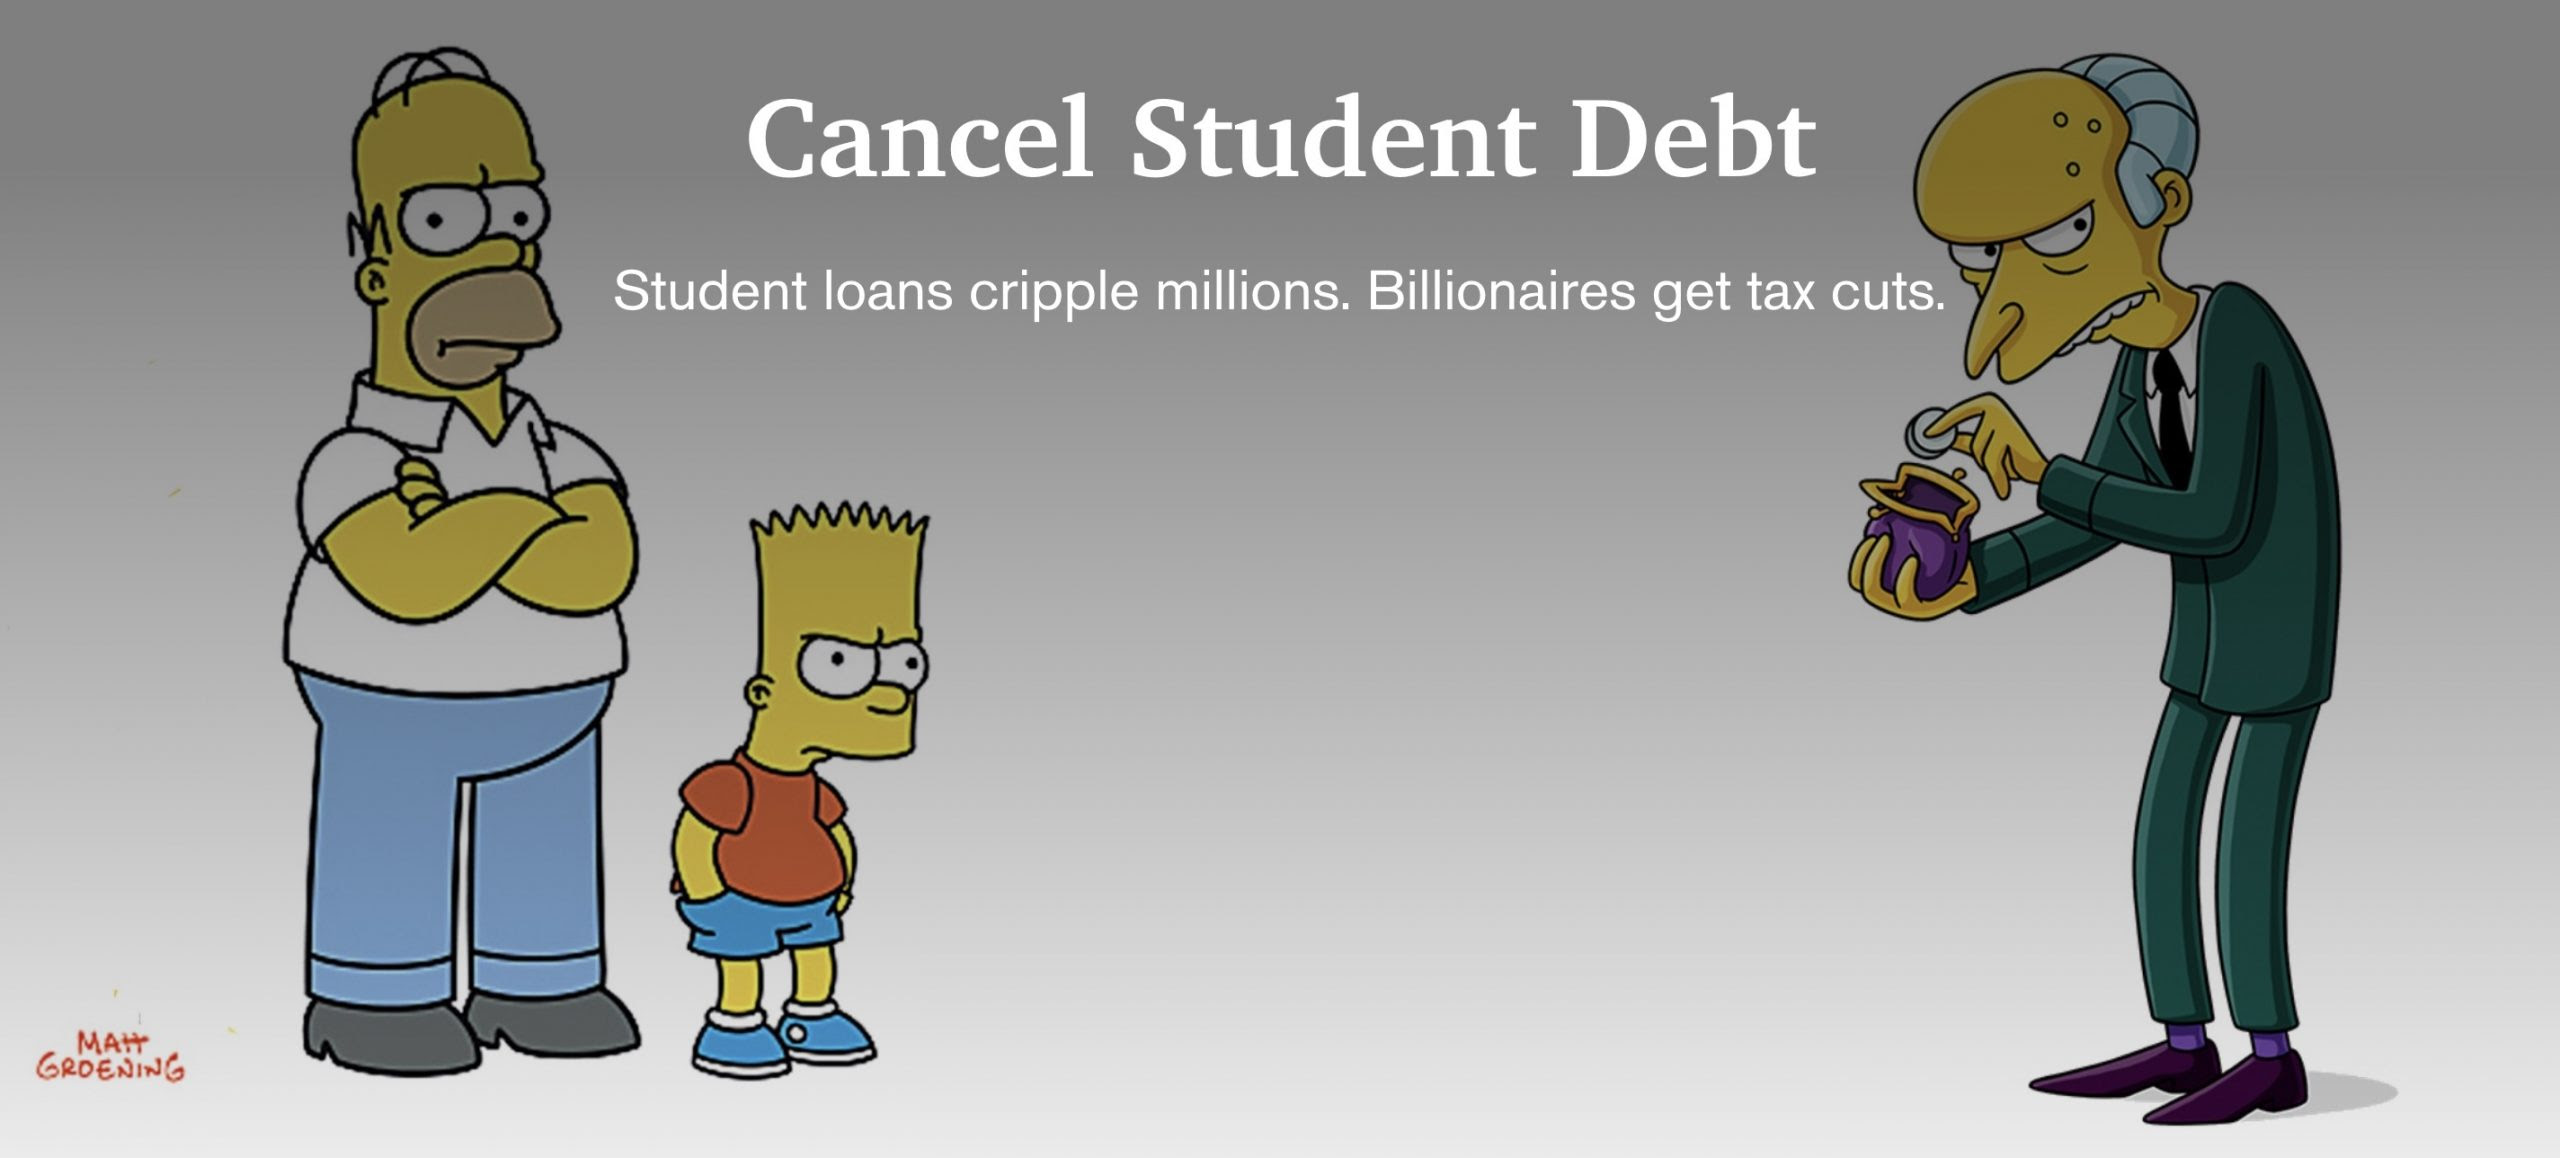 Cancel Student Debt to fix a rigged system by which billionaires fund politicians to get tax cuts